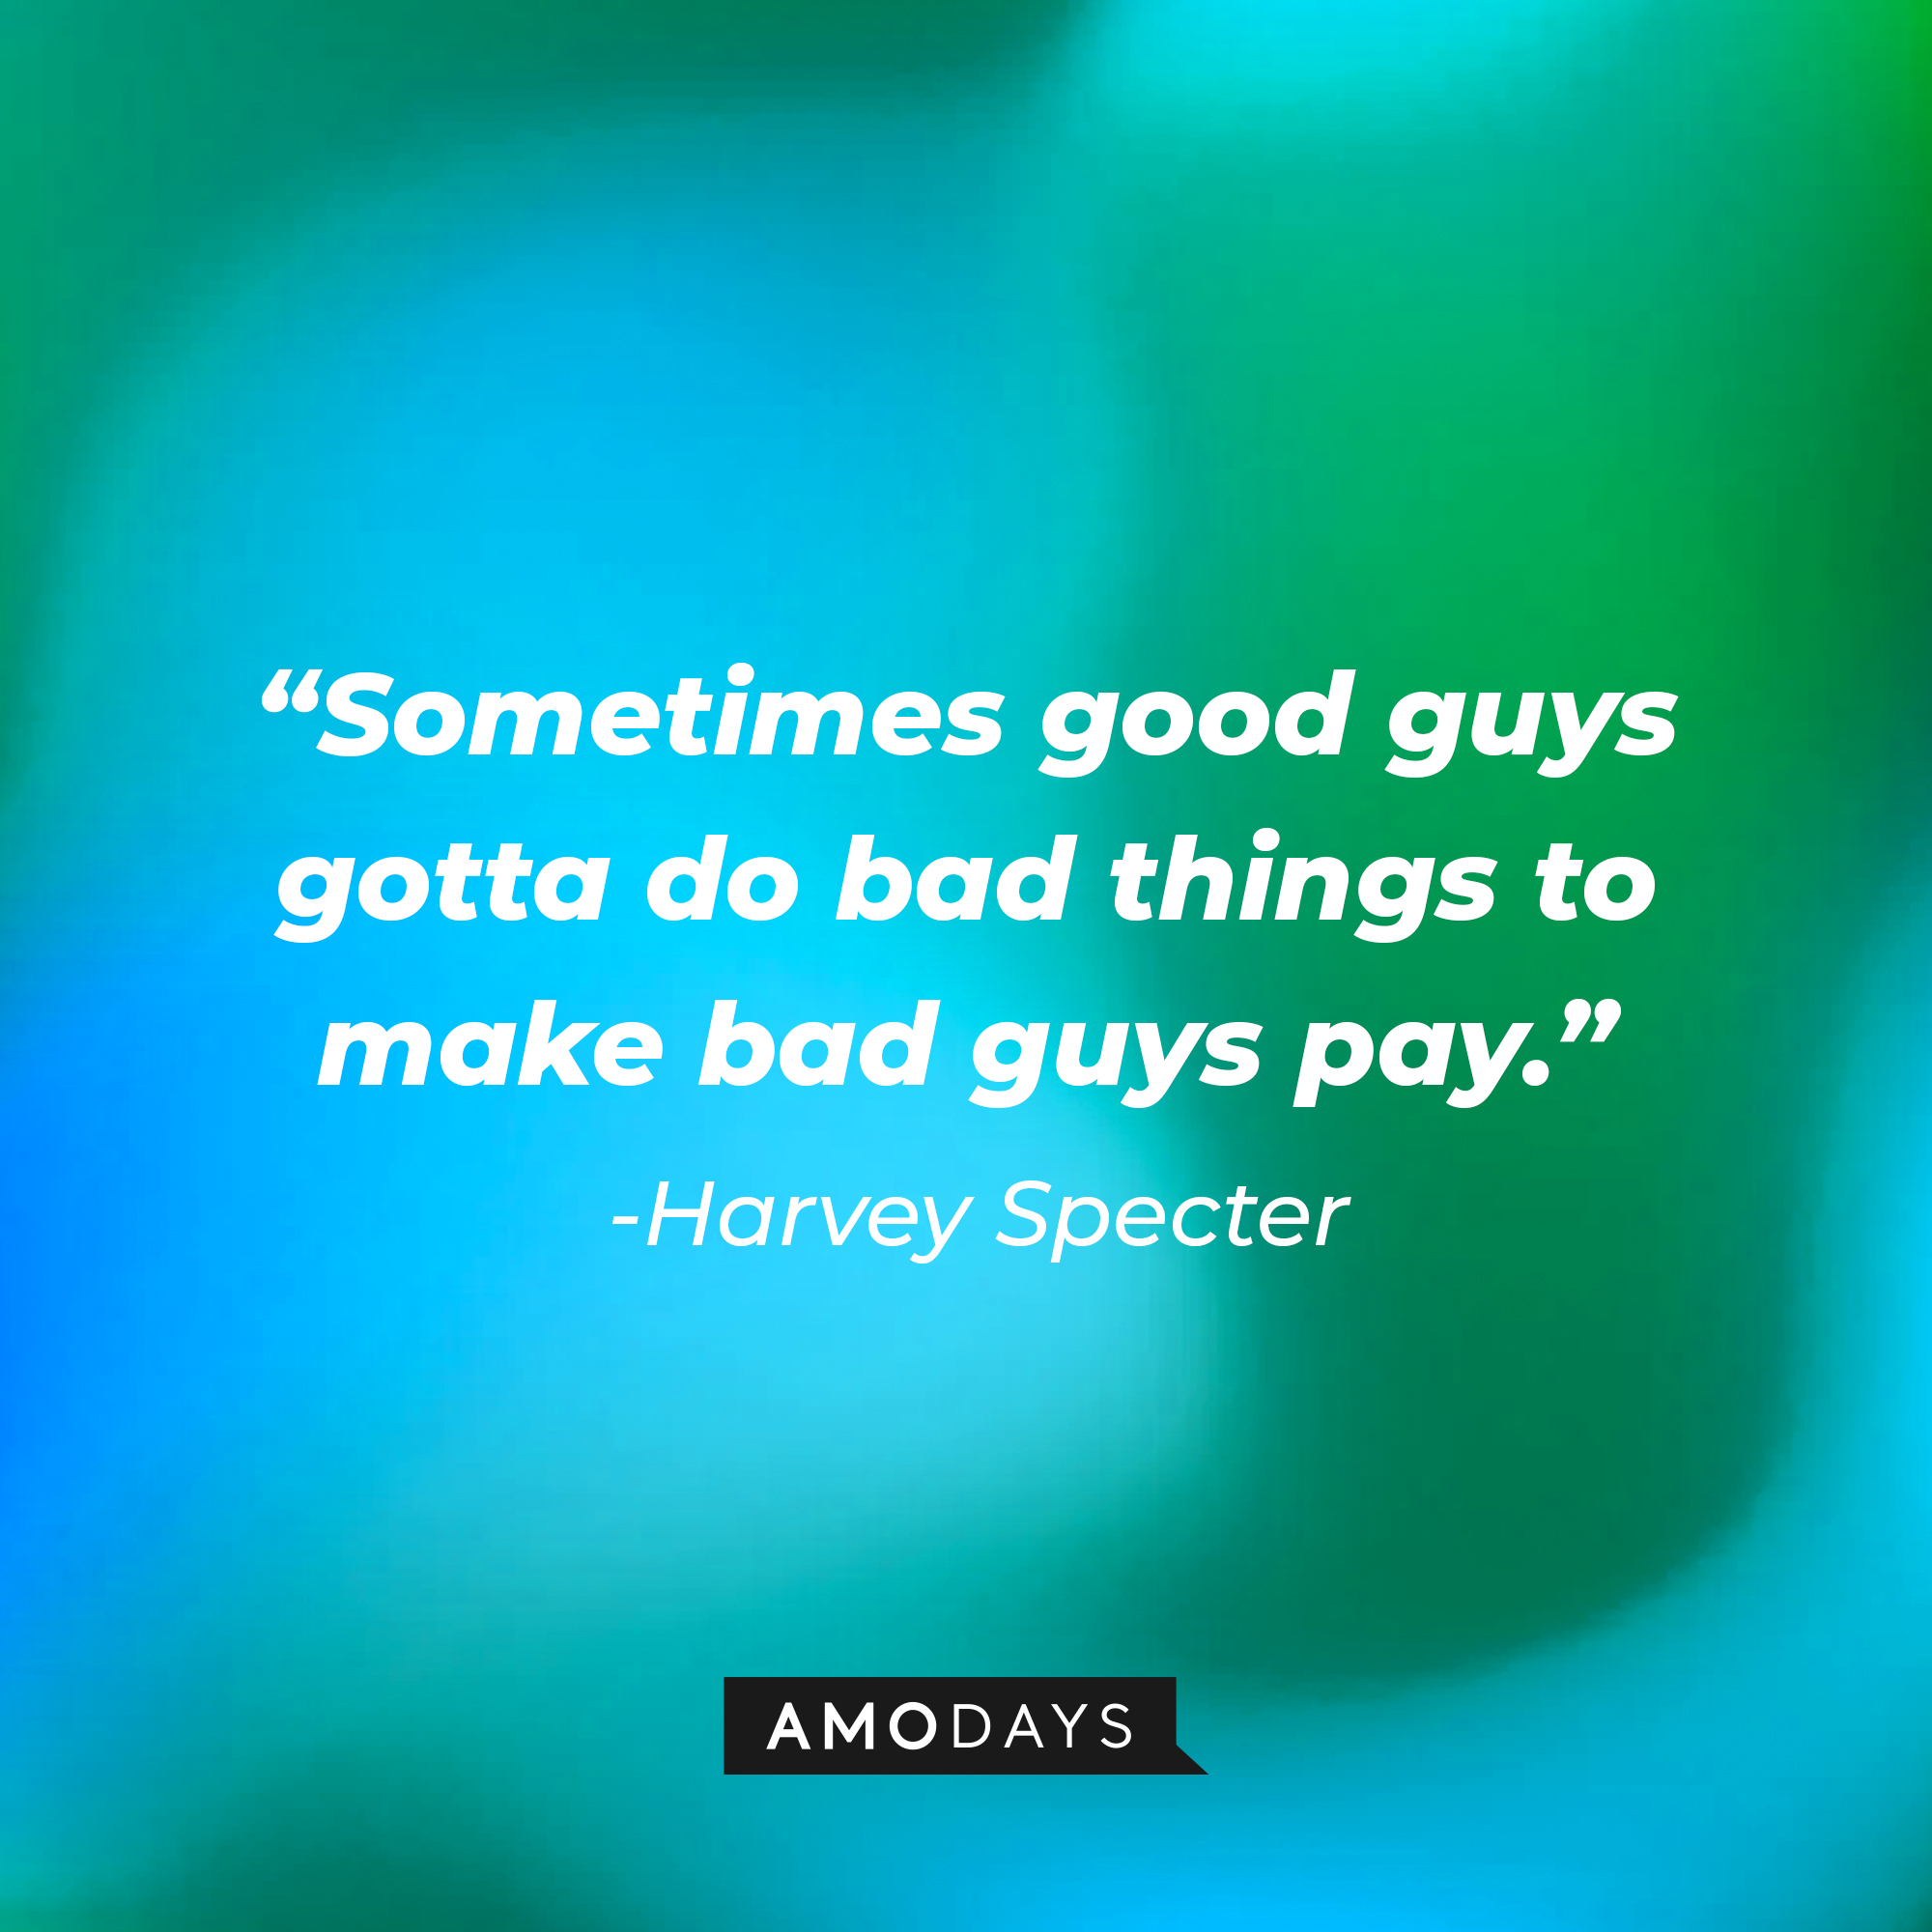 Harvey Specter's quote from "Suits" : "Sometimes good guys gotta do bad things to make bad guys pay." | Source: Amodays